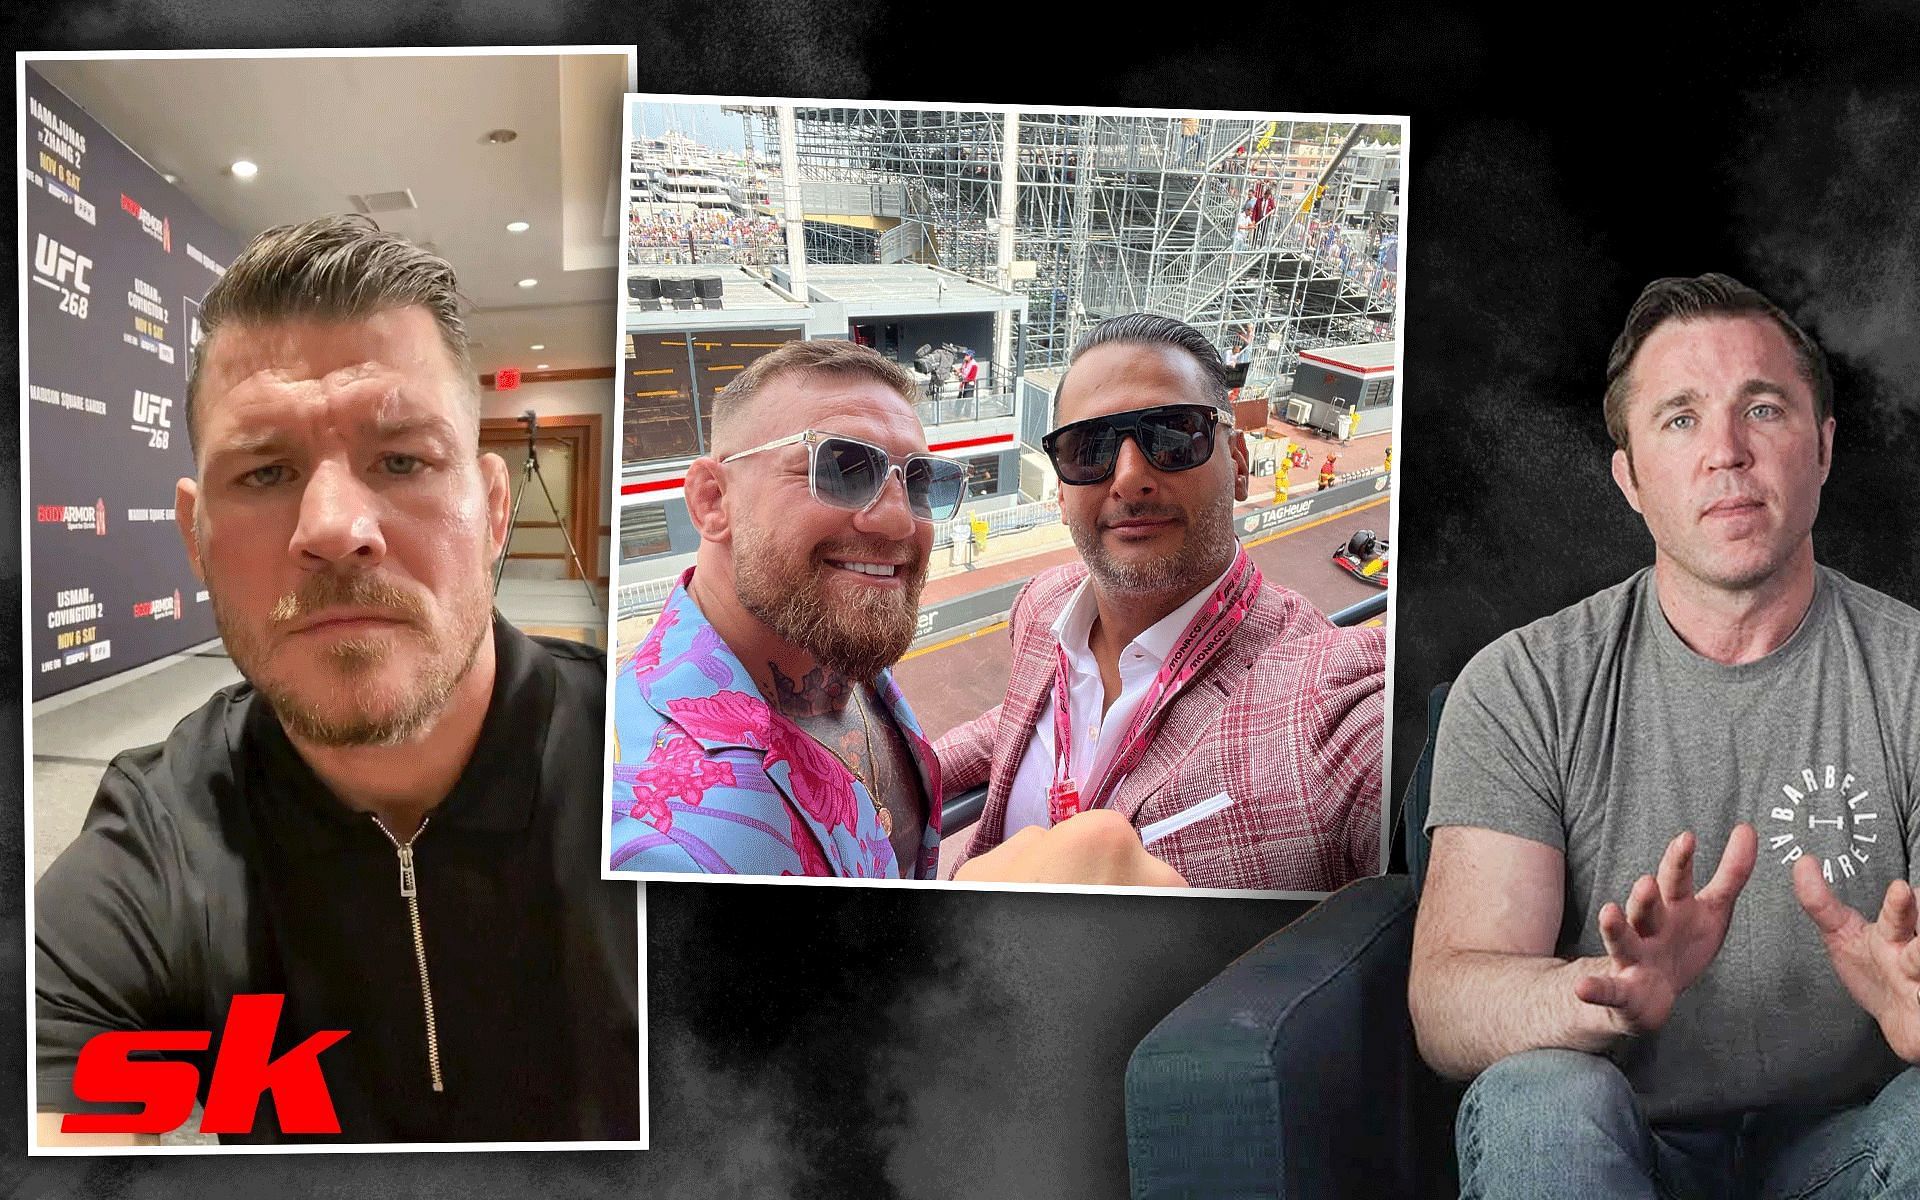 Michael Bisping (left), Conor McGregor and Audie Attar (center), and Chael Sonnen (right). [Images courtesy: left image from Instagram @mikebisping, center image from Instagram @audieattar, and right from YouTube Chael Sonnen]